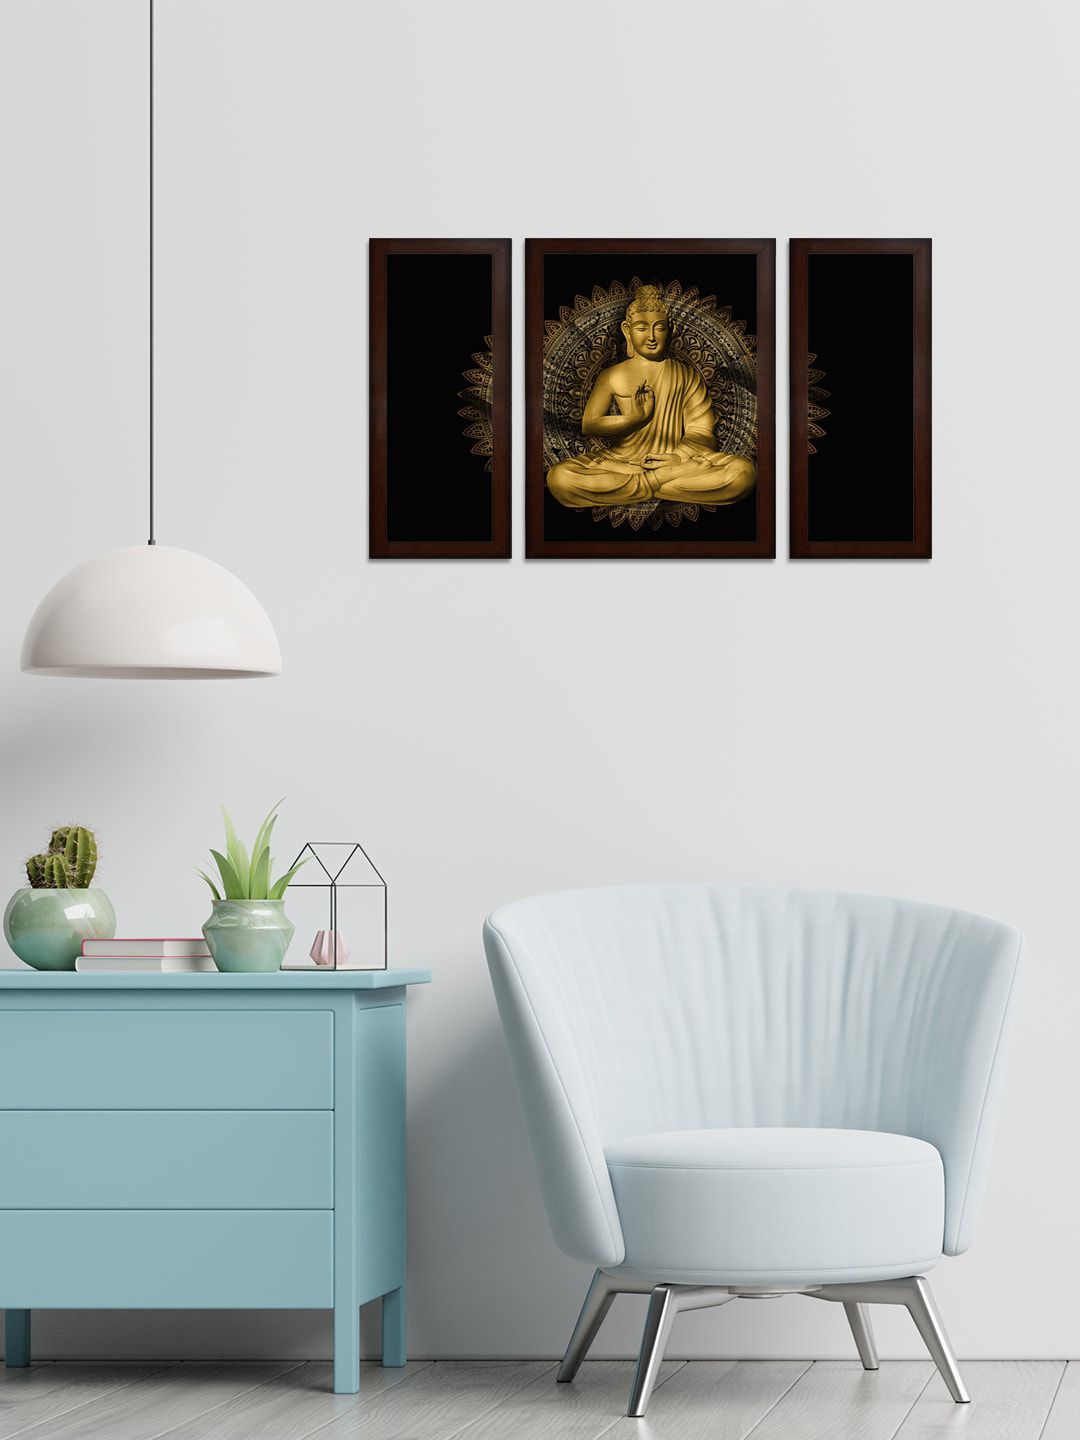 WENS Set Of 3 Black & Yellow Buddha MDF Wall Paintings Price in India